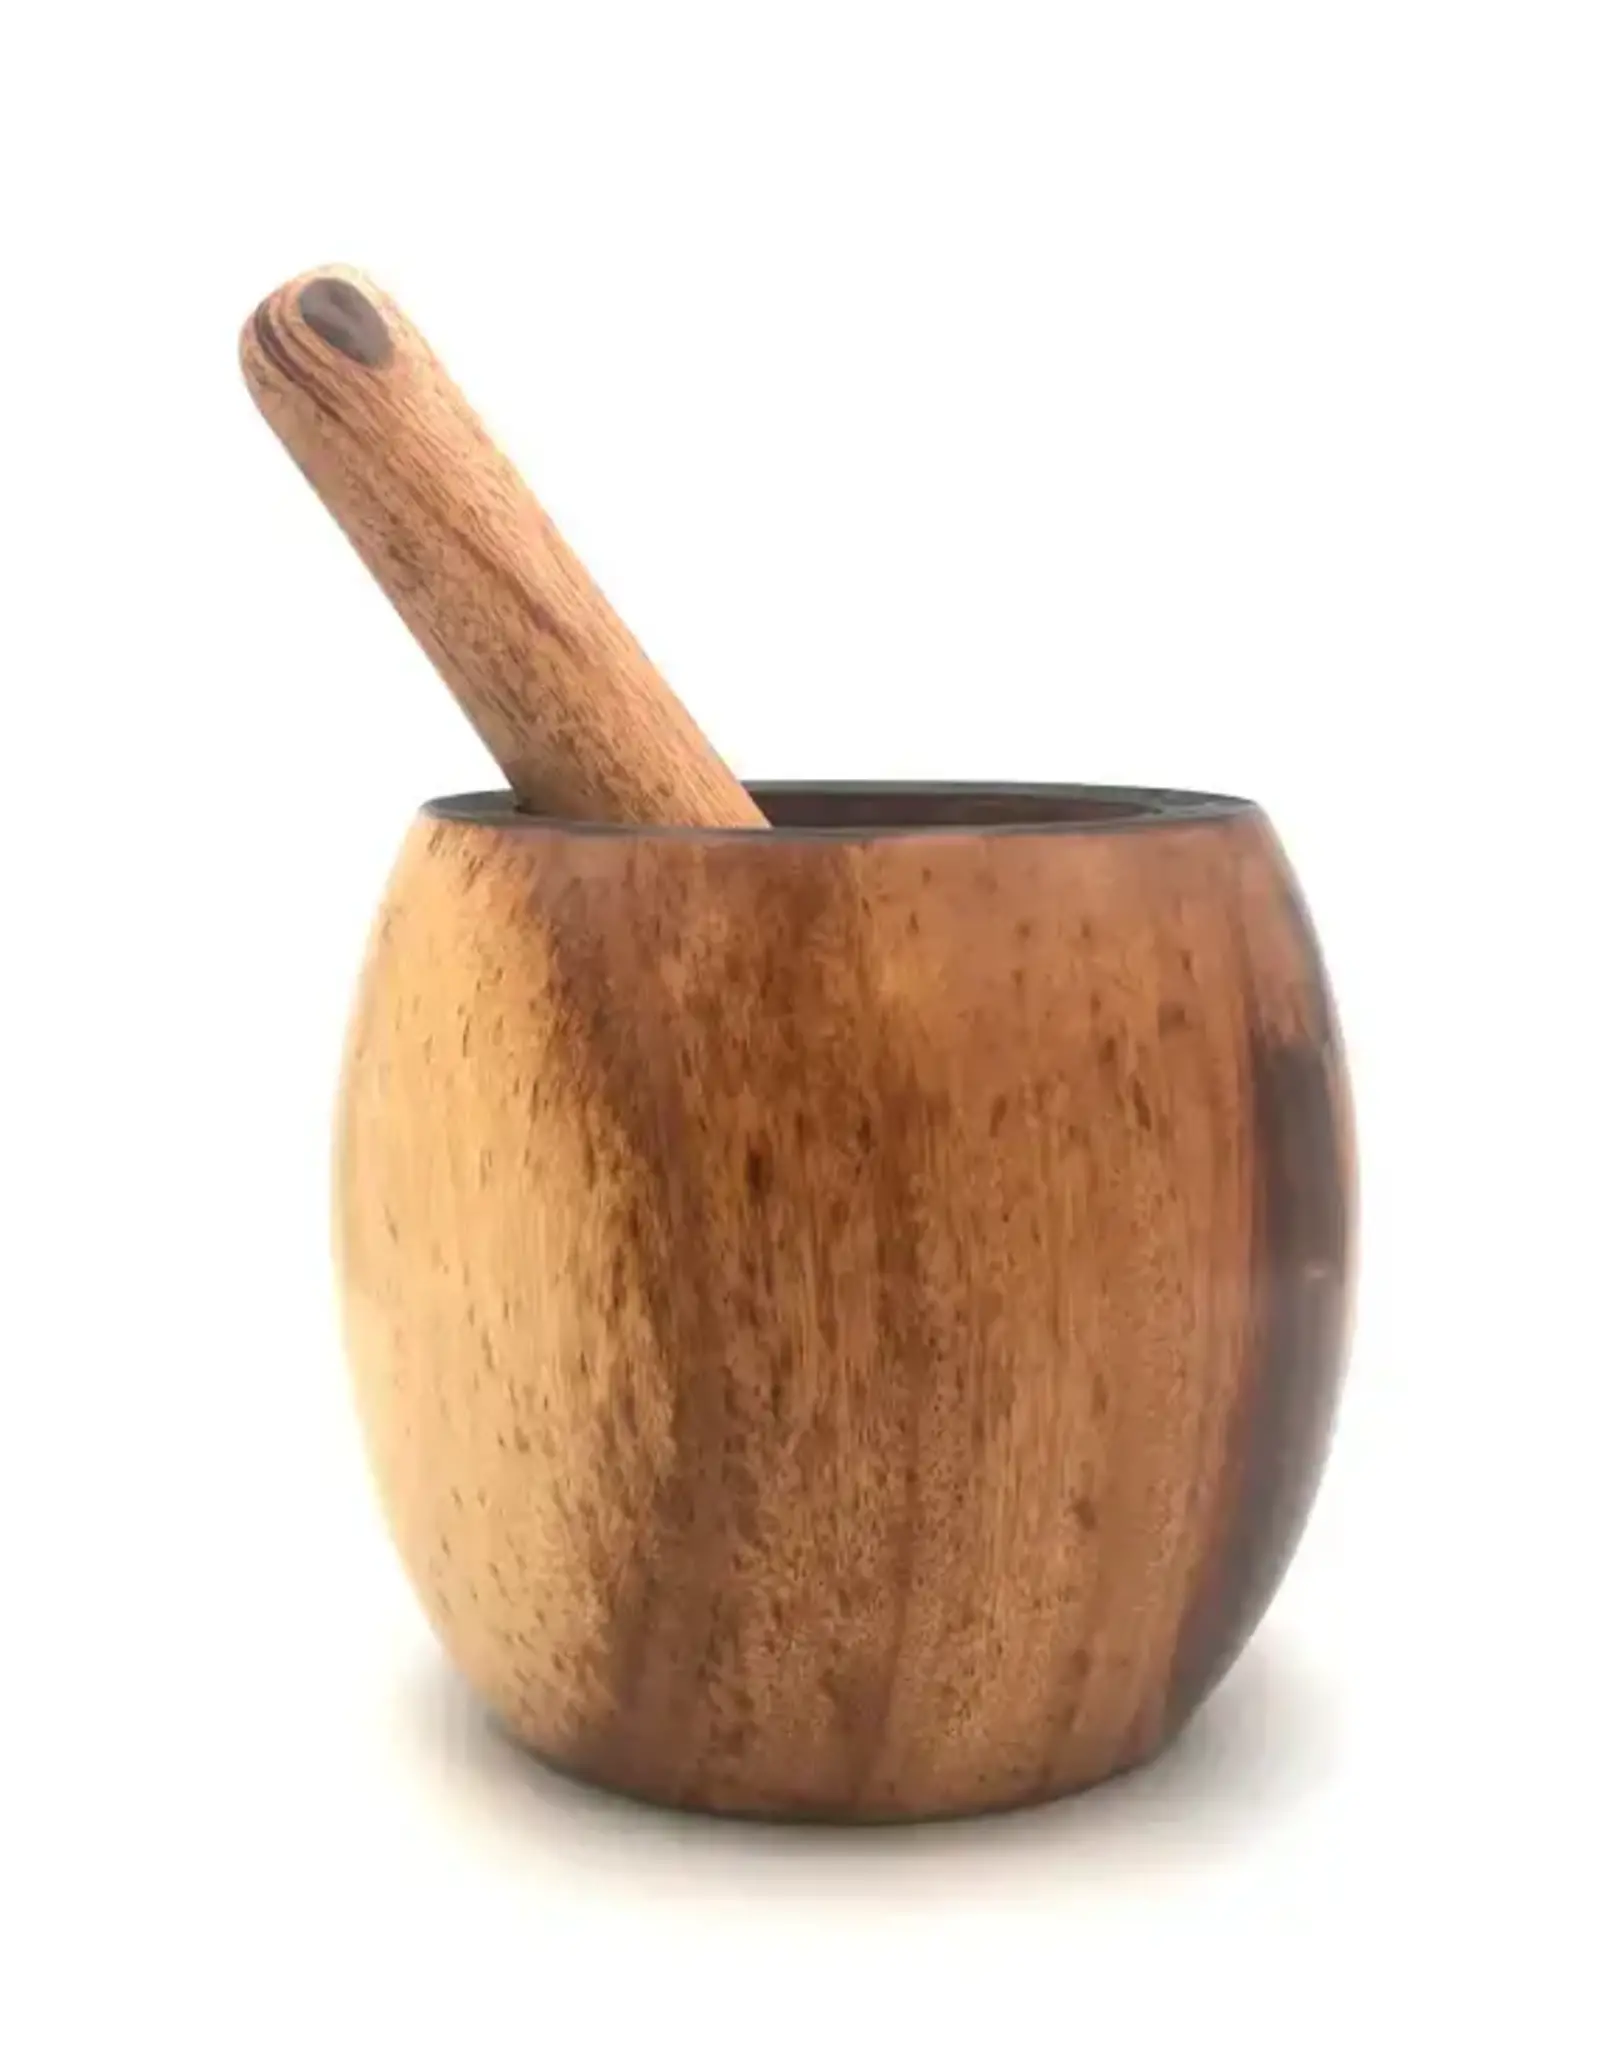 Women of the Cloud Forest Tropical Hardwood Mortar & Pestle - Large